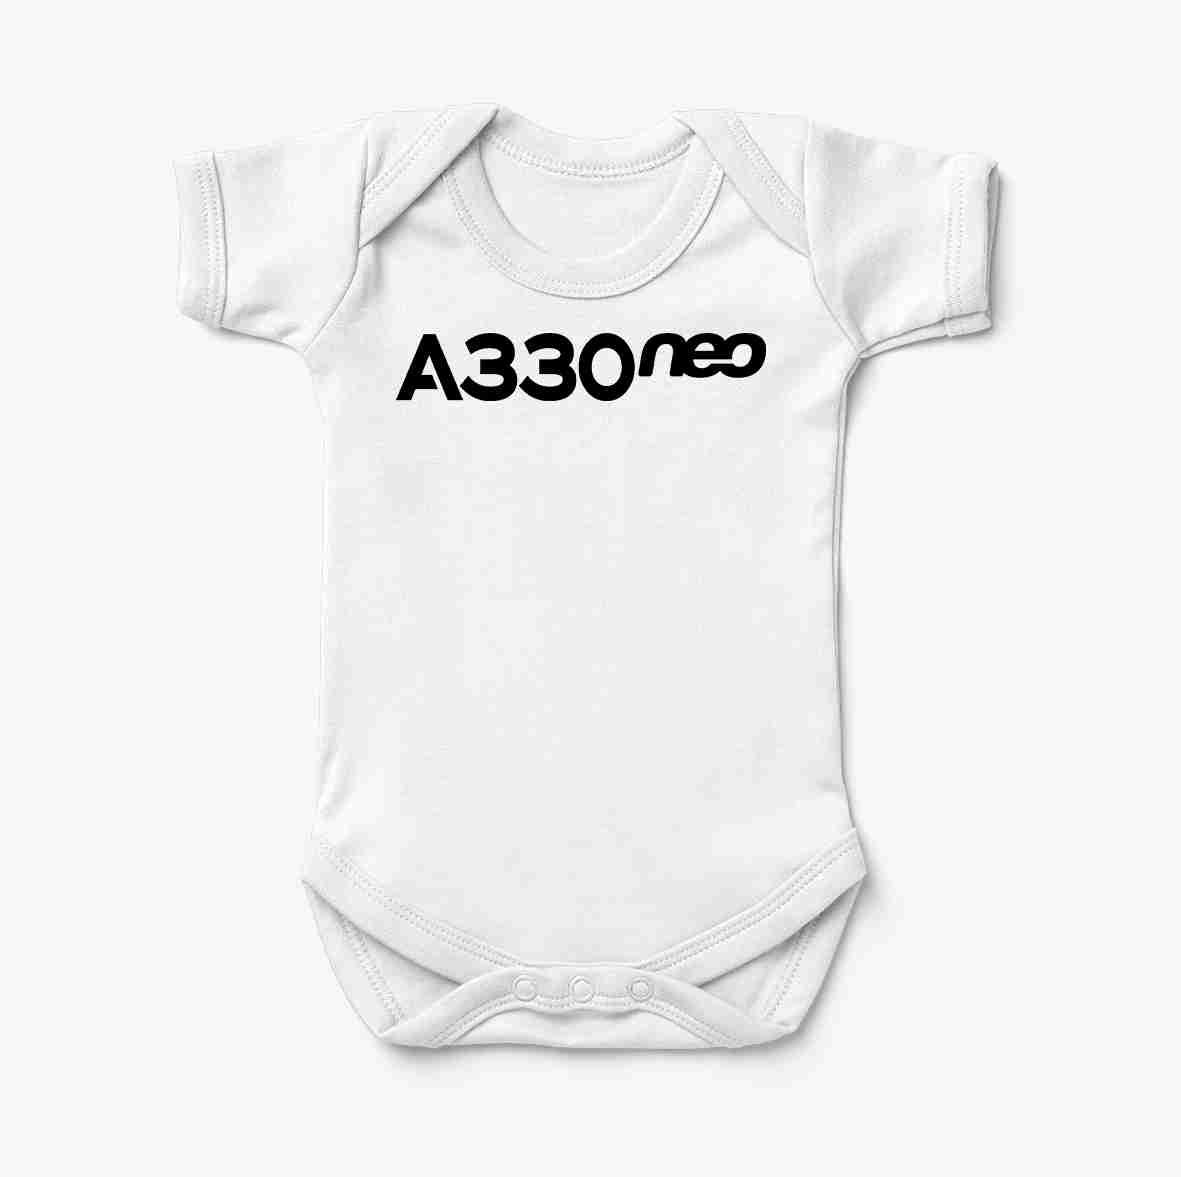 A330neo & Text Designed Baby Bodysuits